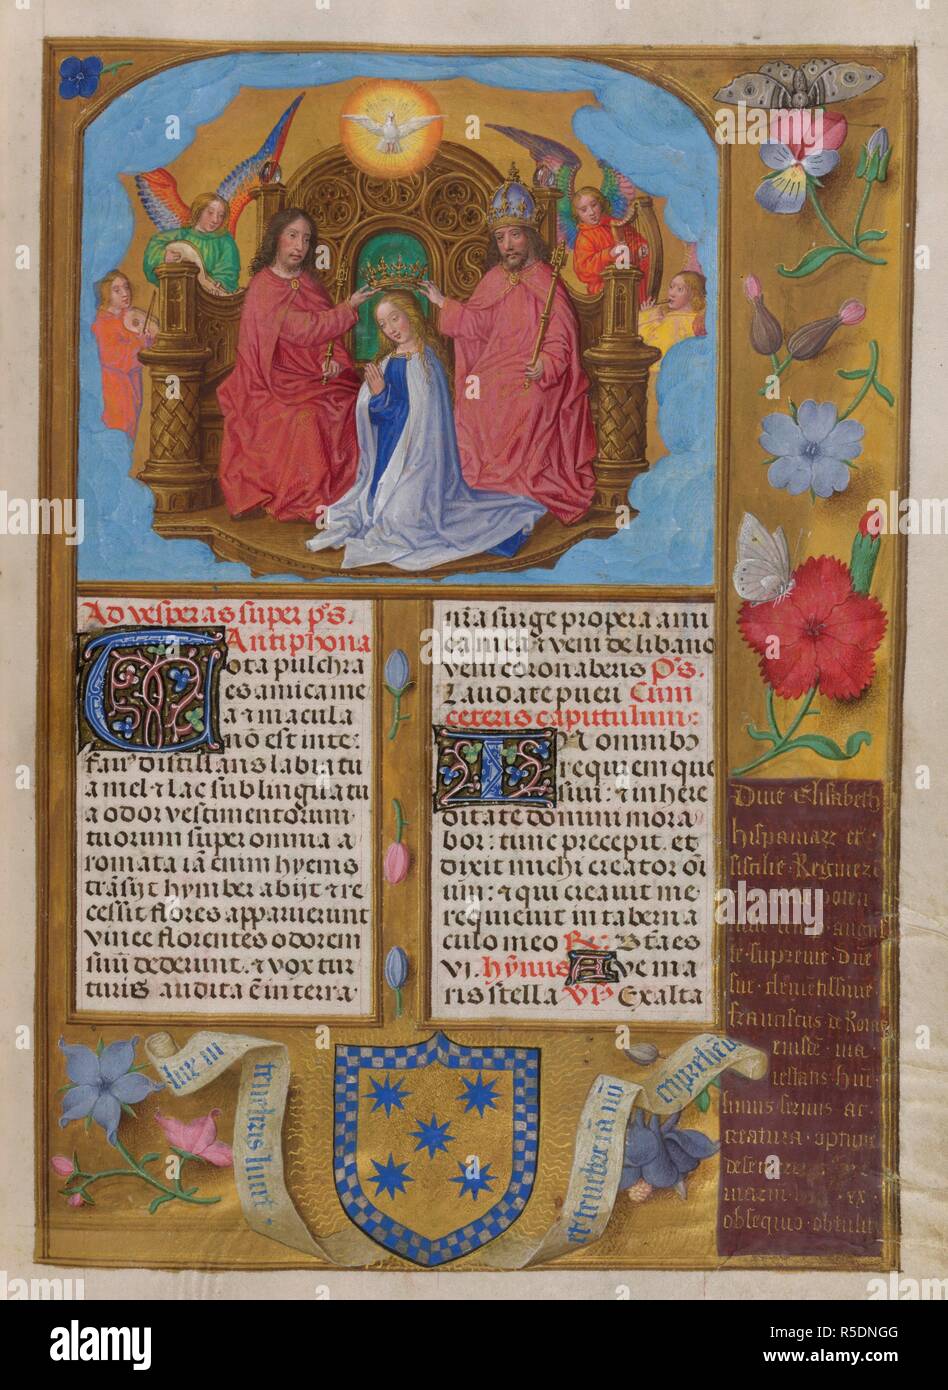 Coronation of the Virgin.  Sanctorale; feast of the Coronation of the Virgin; The Virgin kneeling, with Holy Spirit above; angels playing harp, fiddle,and lute.Text with decorated initials. Borders of trompe l'oeil decoration with flowers and insects. At foot, the arms of Francisco de Rojas, with scrolls containing inscription from John 1, 5, and a dedicatory inscription. Isabella Breviary. S. Netherlands [Bruges?]; circa 1490-1497. Source: Add. 18851, f.437. Language: Latin. Author: Master of James IV of Scotland. Stock Photo